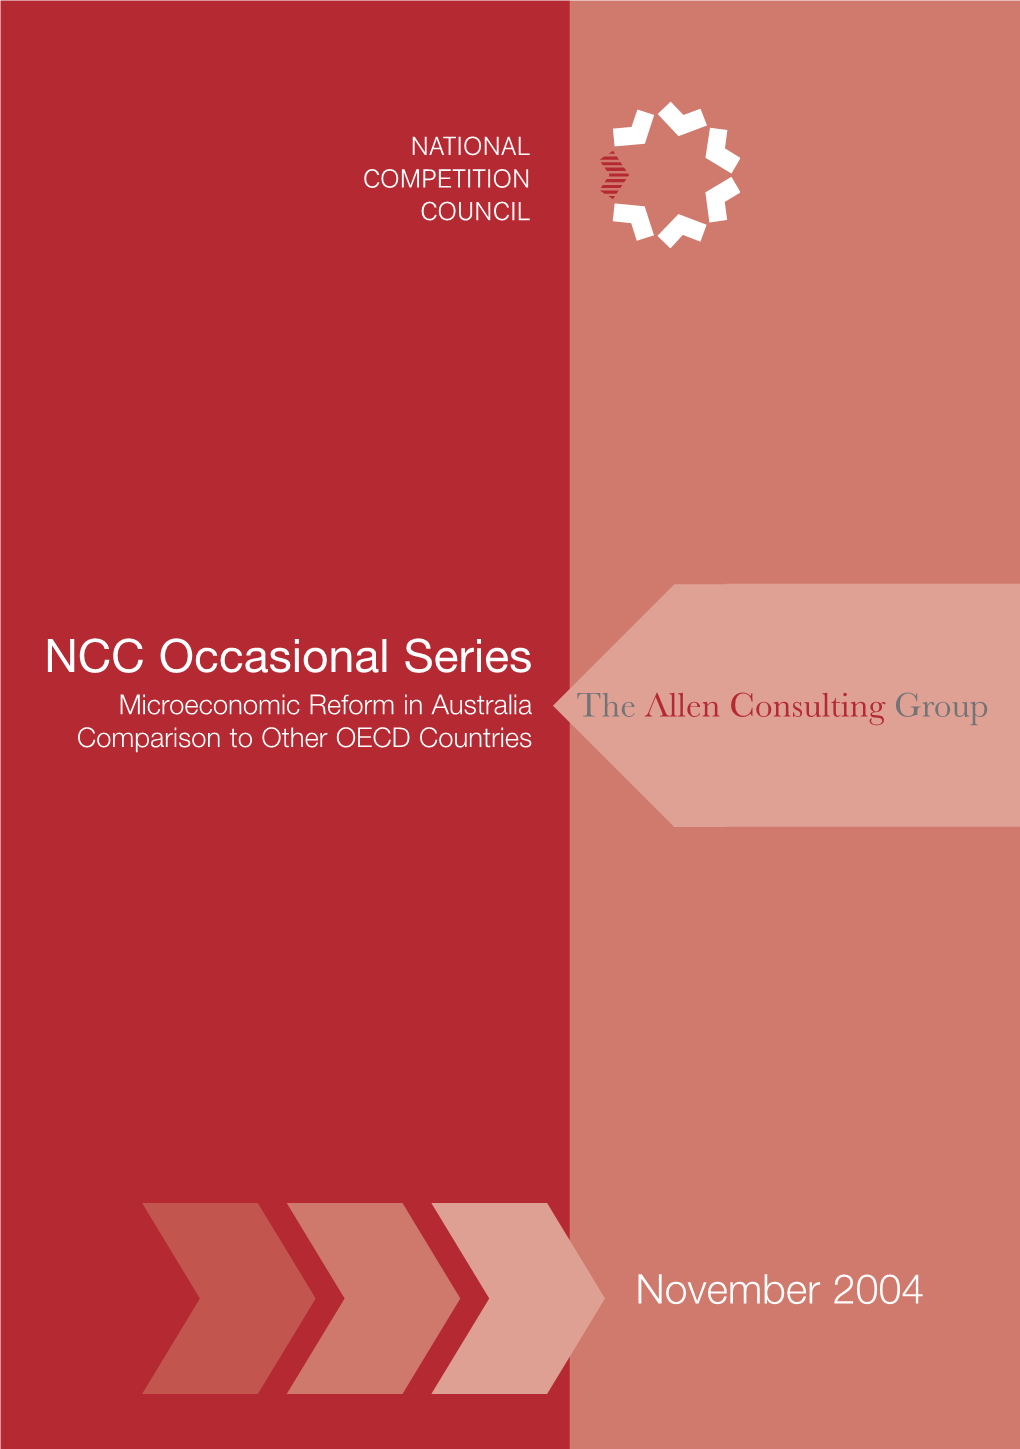 National Competition Council 2004, NCC Occasional Series: Microeconomic Reform in Australia - Comparison to Other OECD Countries, Ausinfo, Canberra